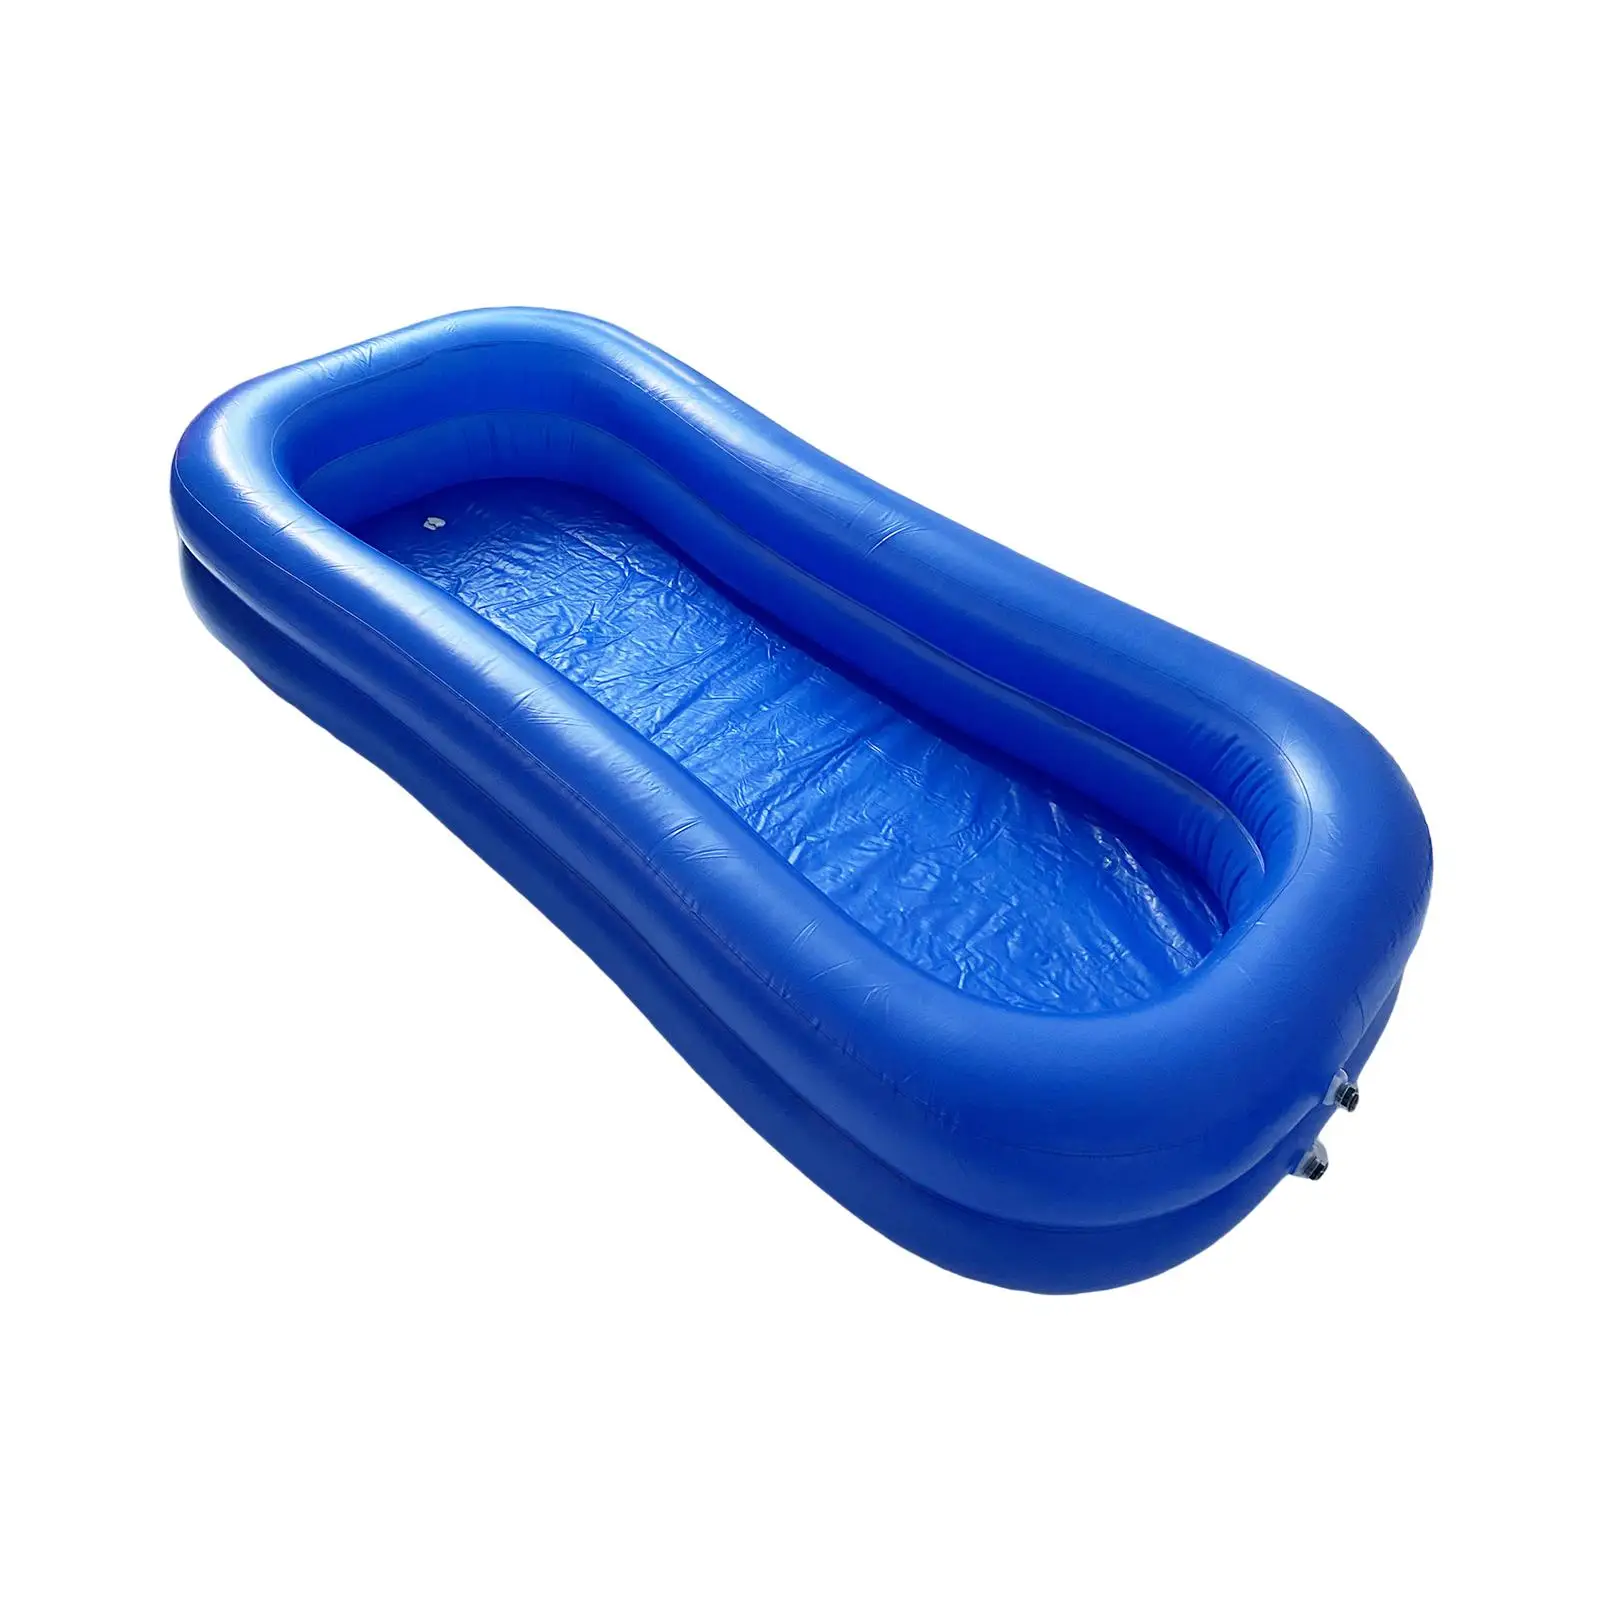 Inflatable Bathtub Body Washing Basin System for Handicapped Adults Elderly